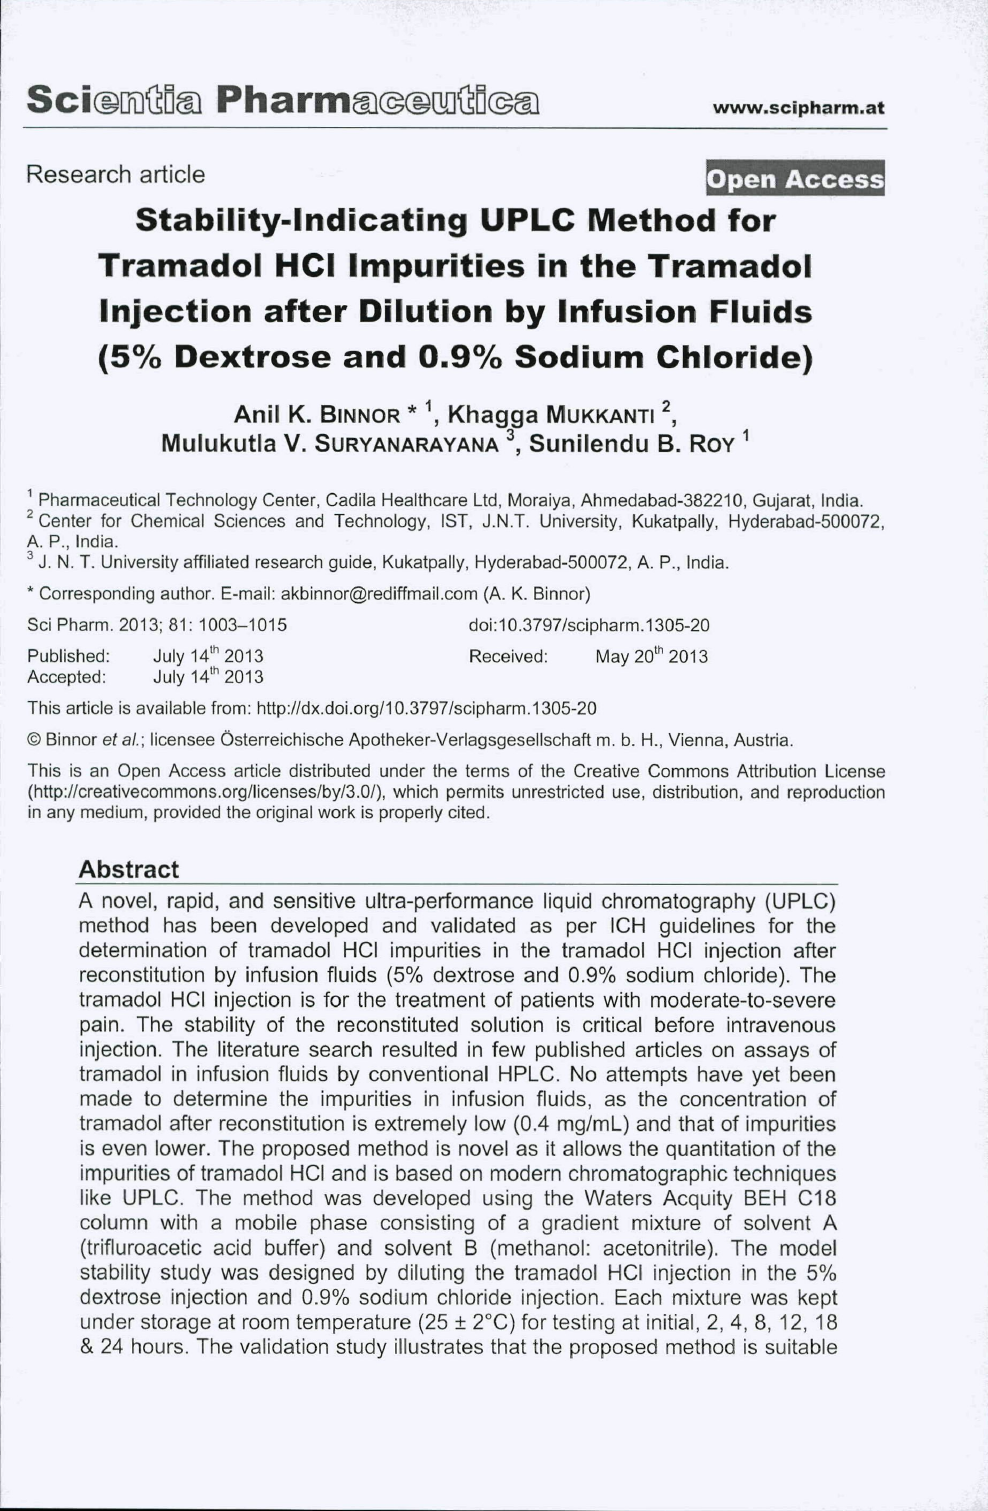 Stability Indicating Uplc Method For Tramadol Hcl Impurities In Tramadol Injection After Dilution By Infusion Fluids 5 Dextrose And 0 9 Sodium Chloride Topic Of Research Paper In Chemical Sciences Download Scholarly Article